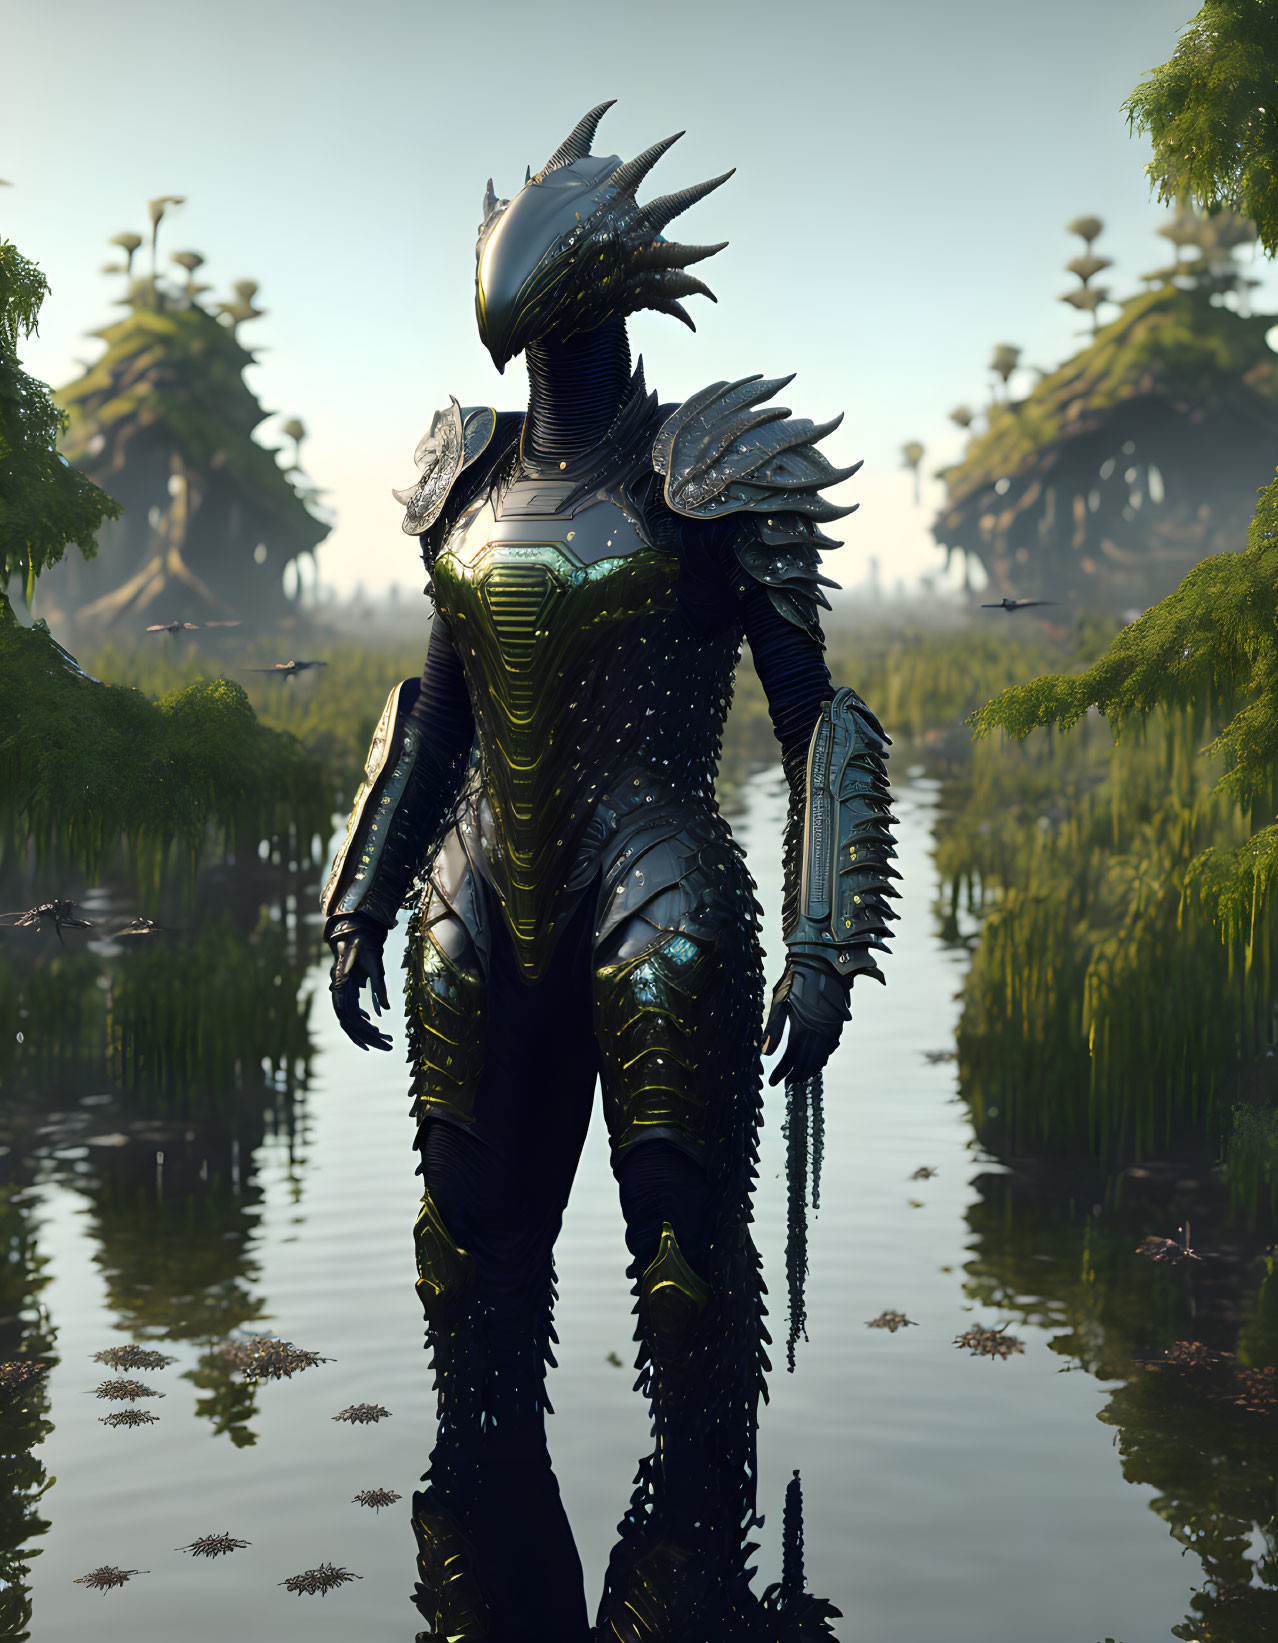 Dragon-inspired Armored Humanoid Figure in Marsh with Reflective Water